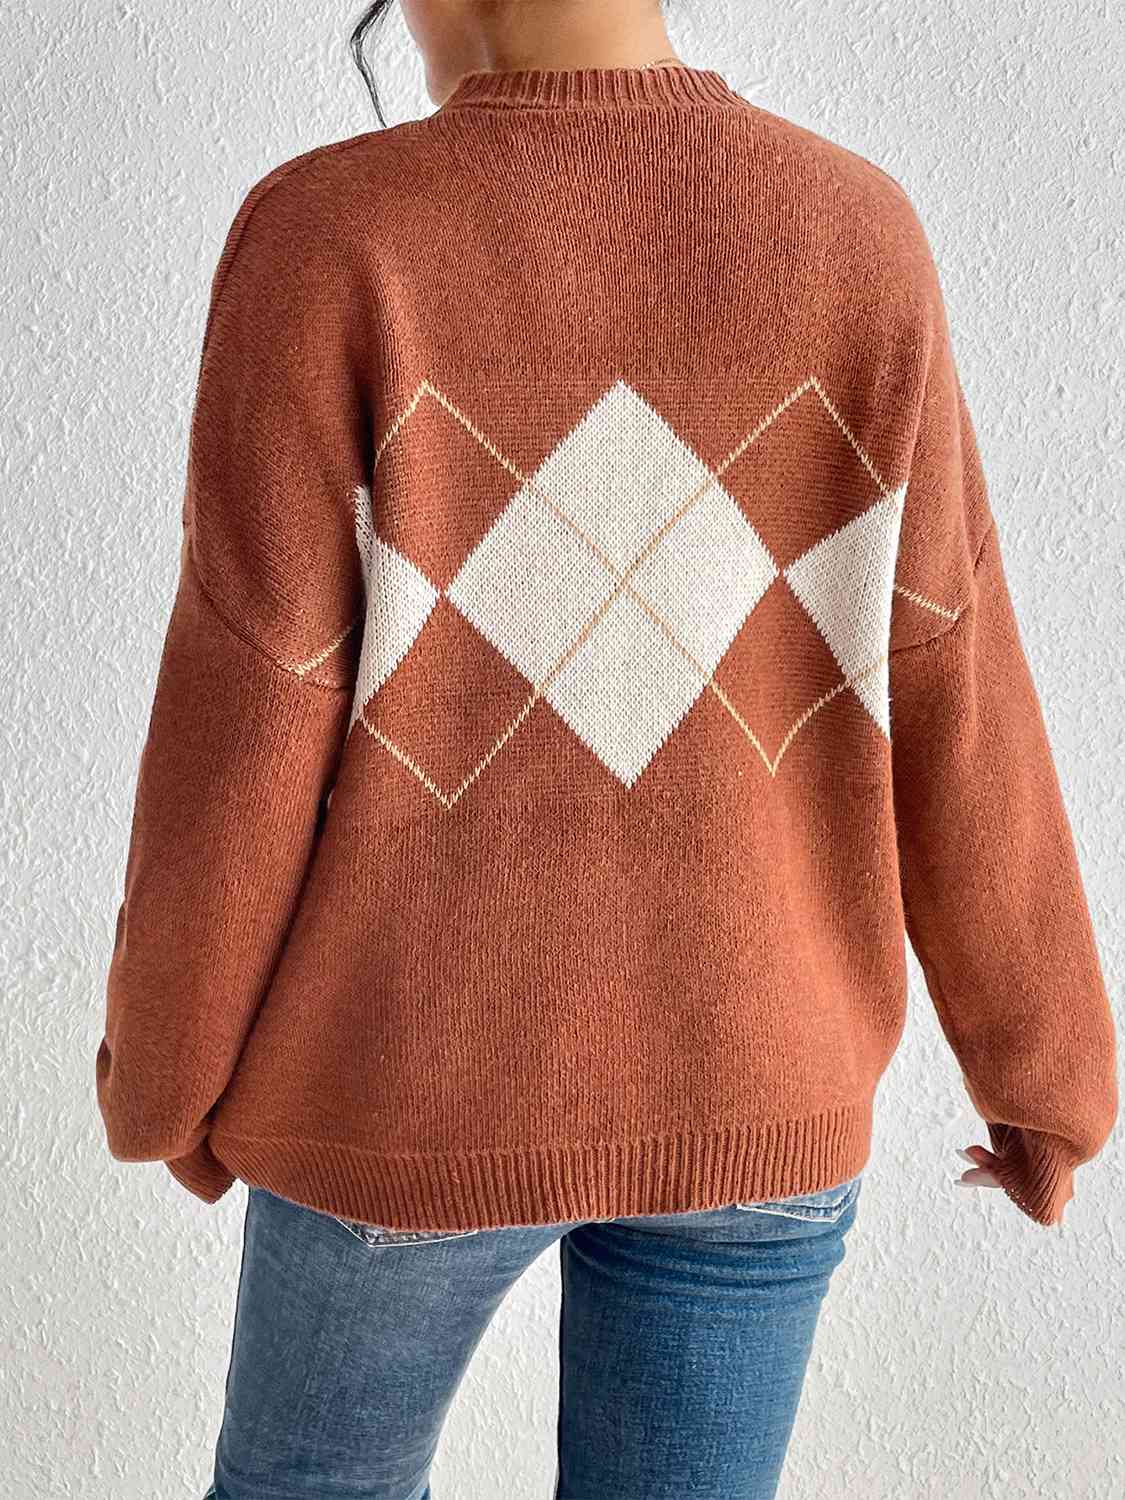 Geometric Dropped Shoulder Sweater - Posh Country Lifestyle Marketplace